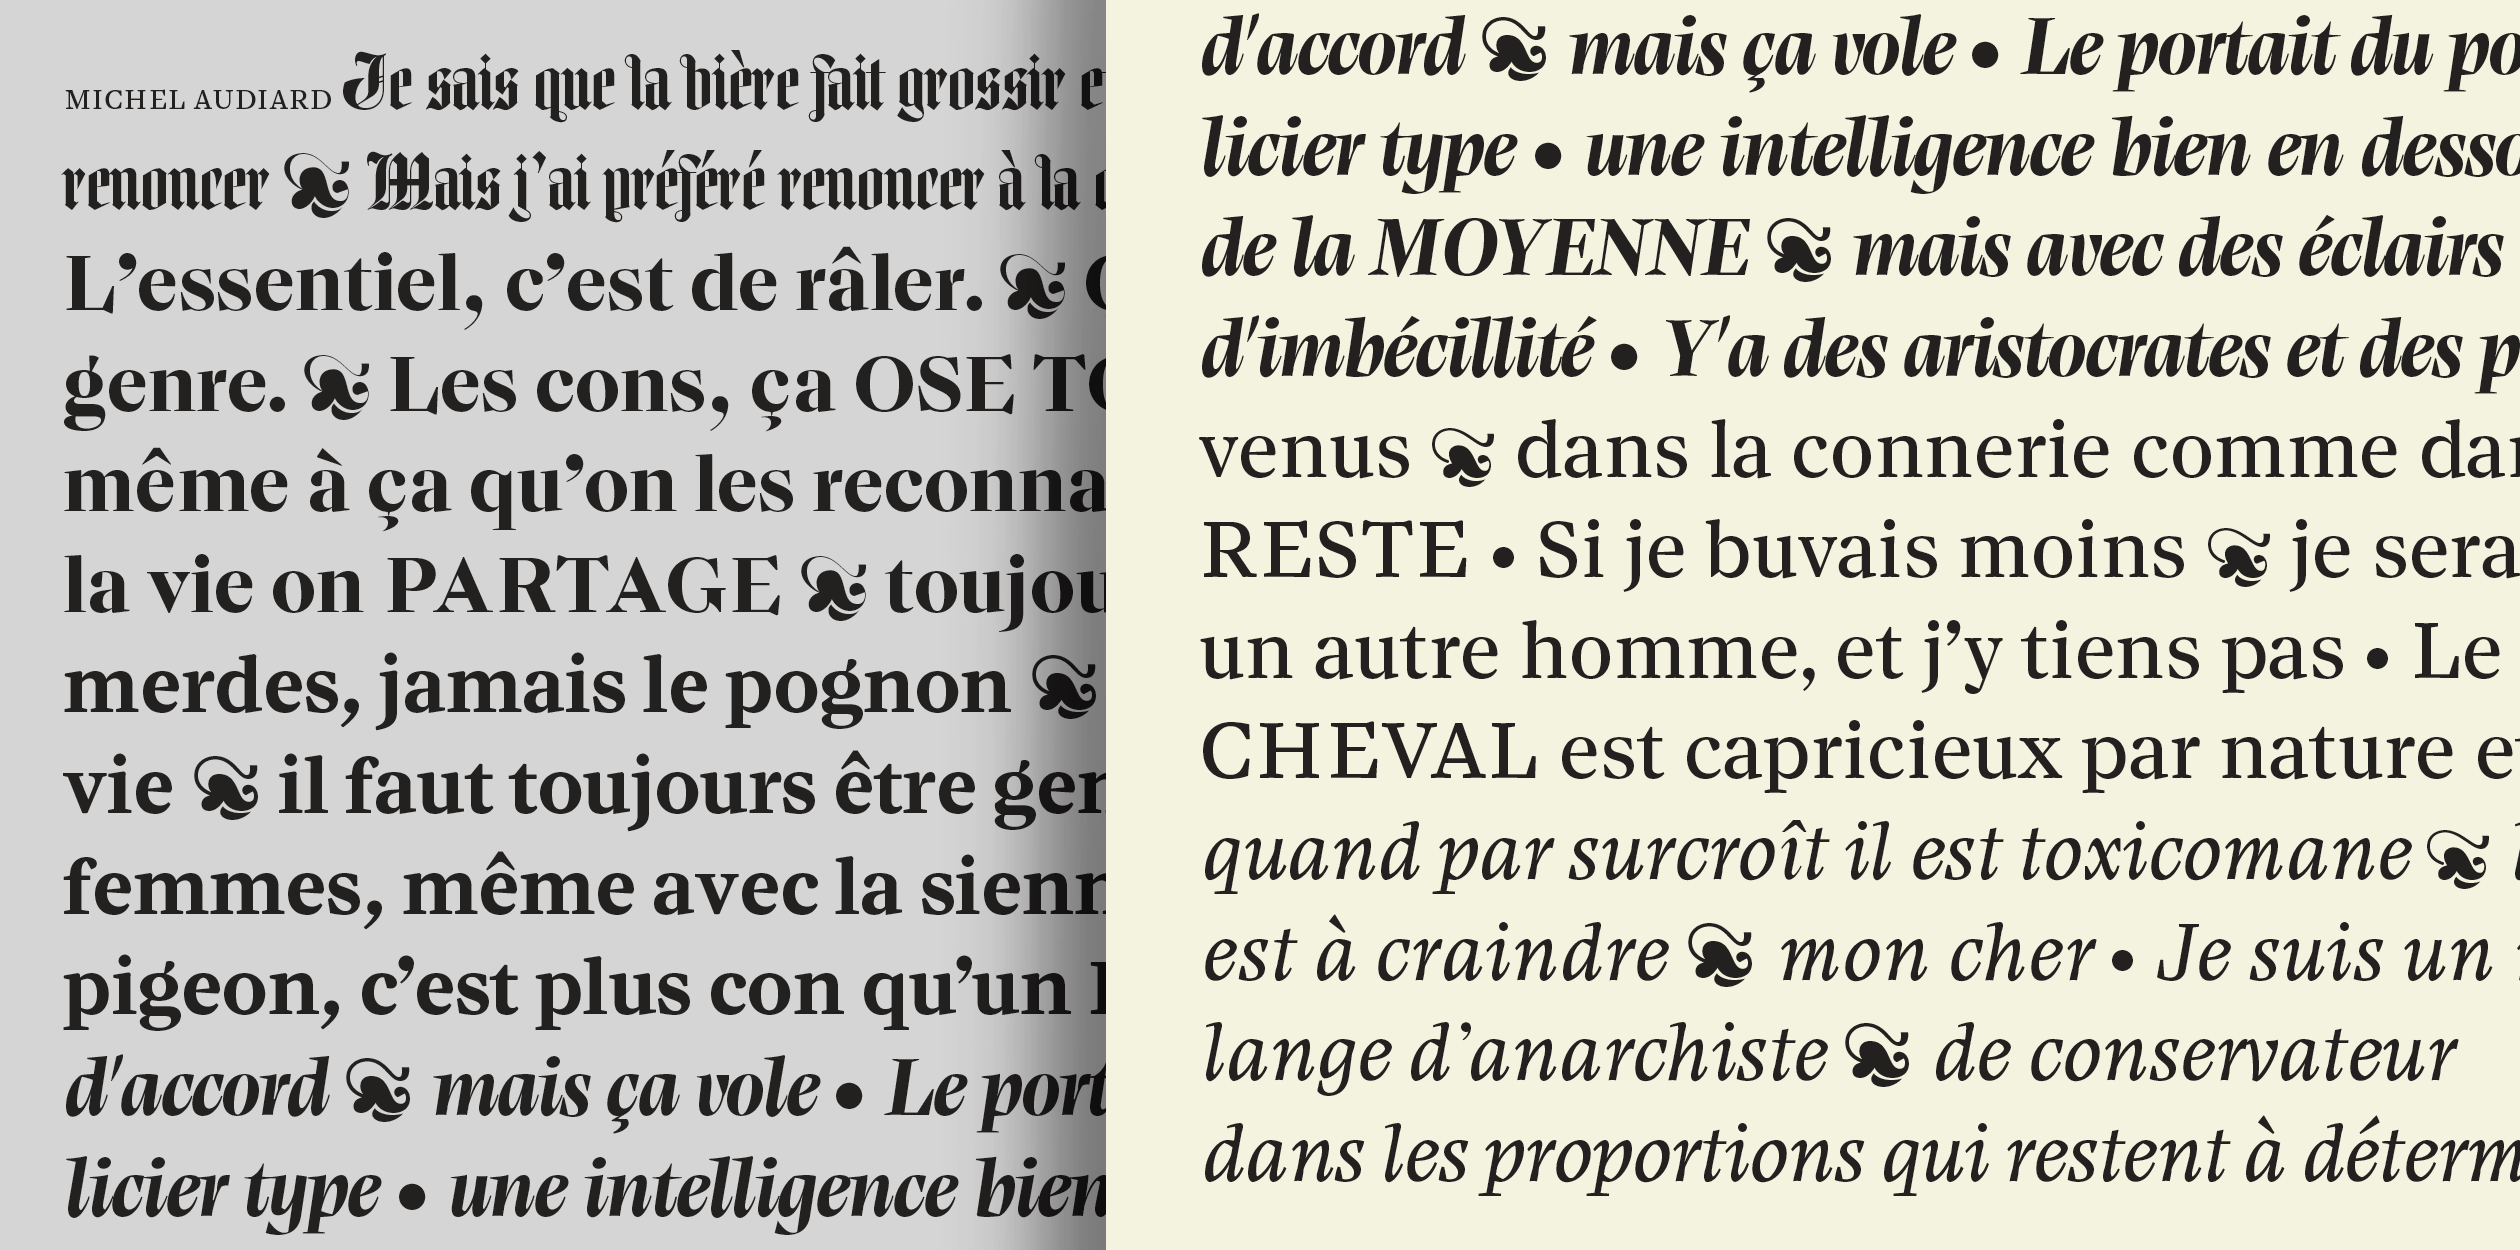 Image of Lemanic typeface project from Loris Olivier